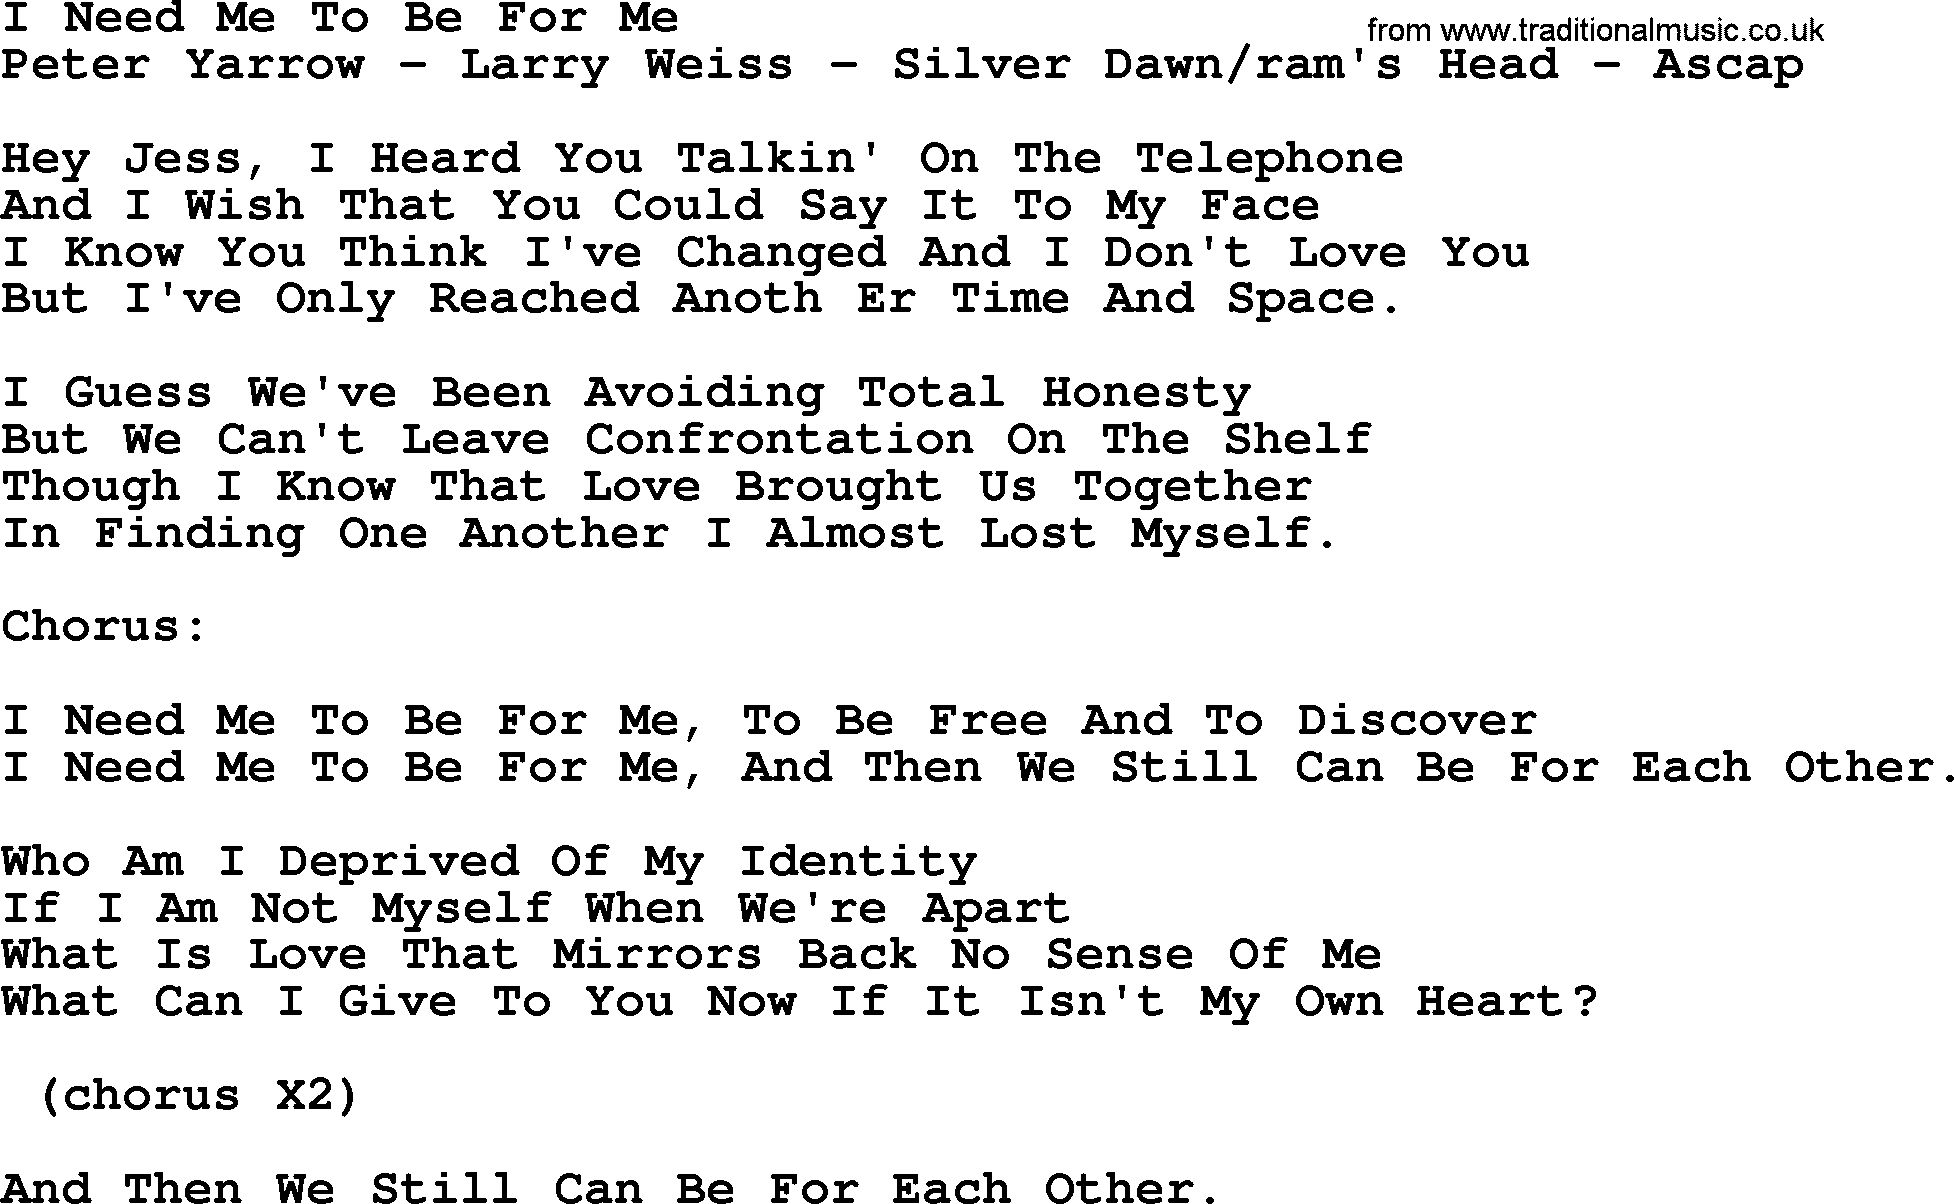 Peter, Paul and Mary song I Need Me To Be For Me1 lyrics